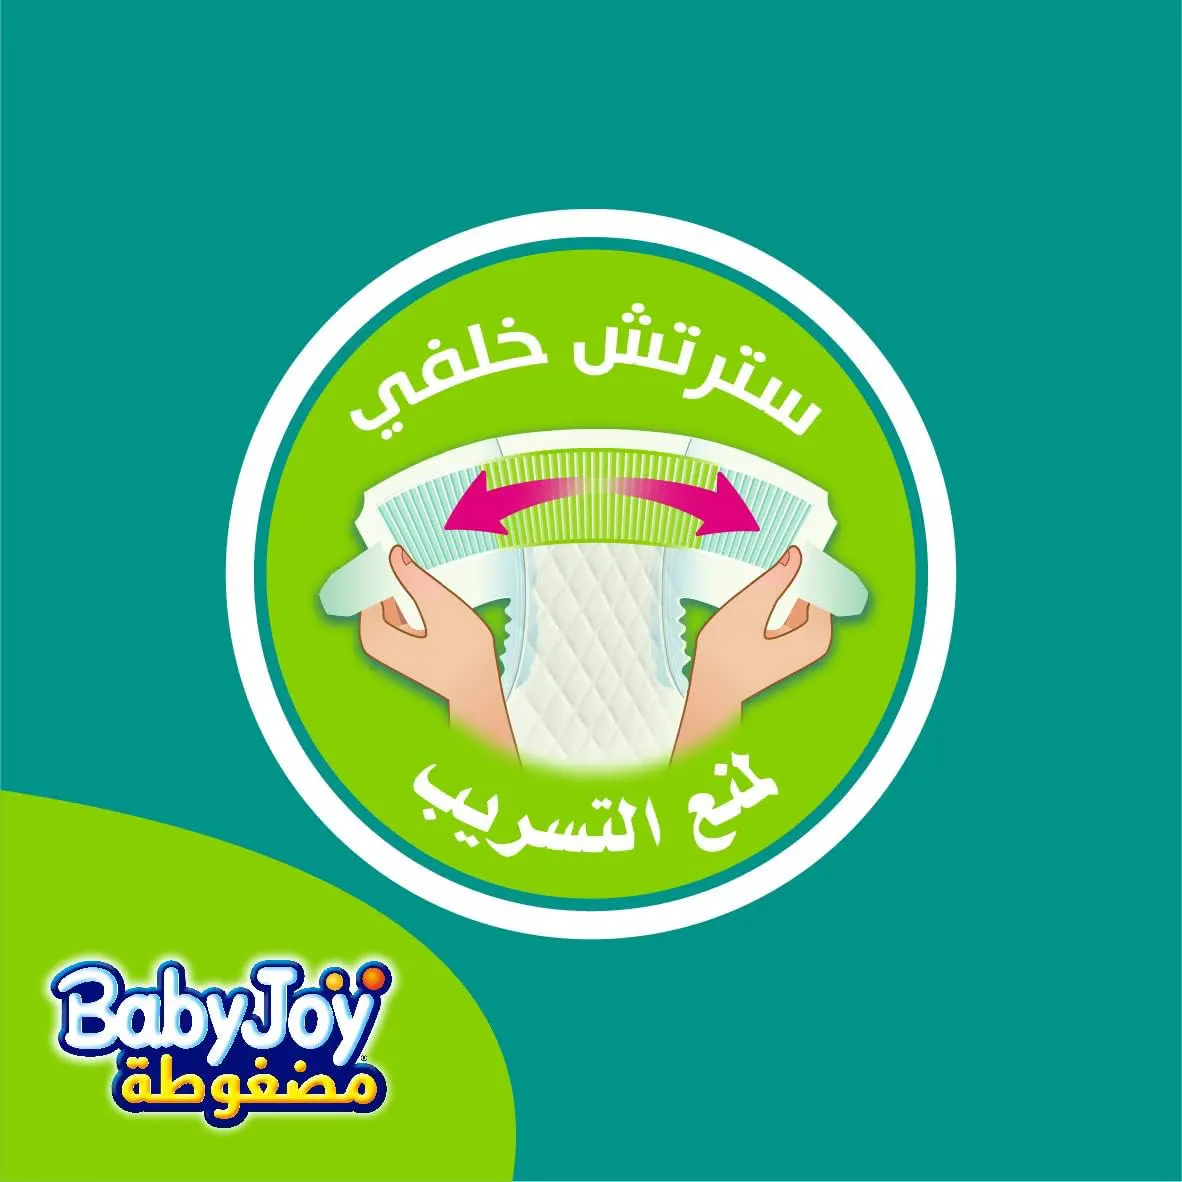 BabyJoy Stretch Diapers for Babies, Size 5, 14-25 kg, 58 Diapers